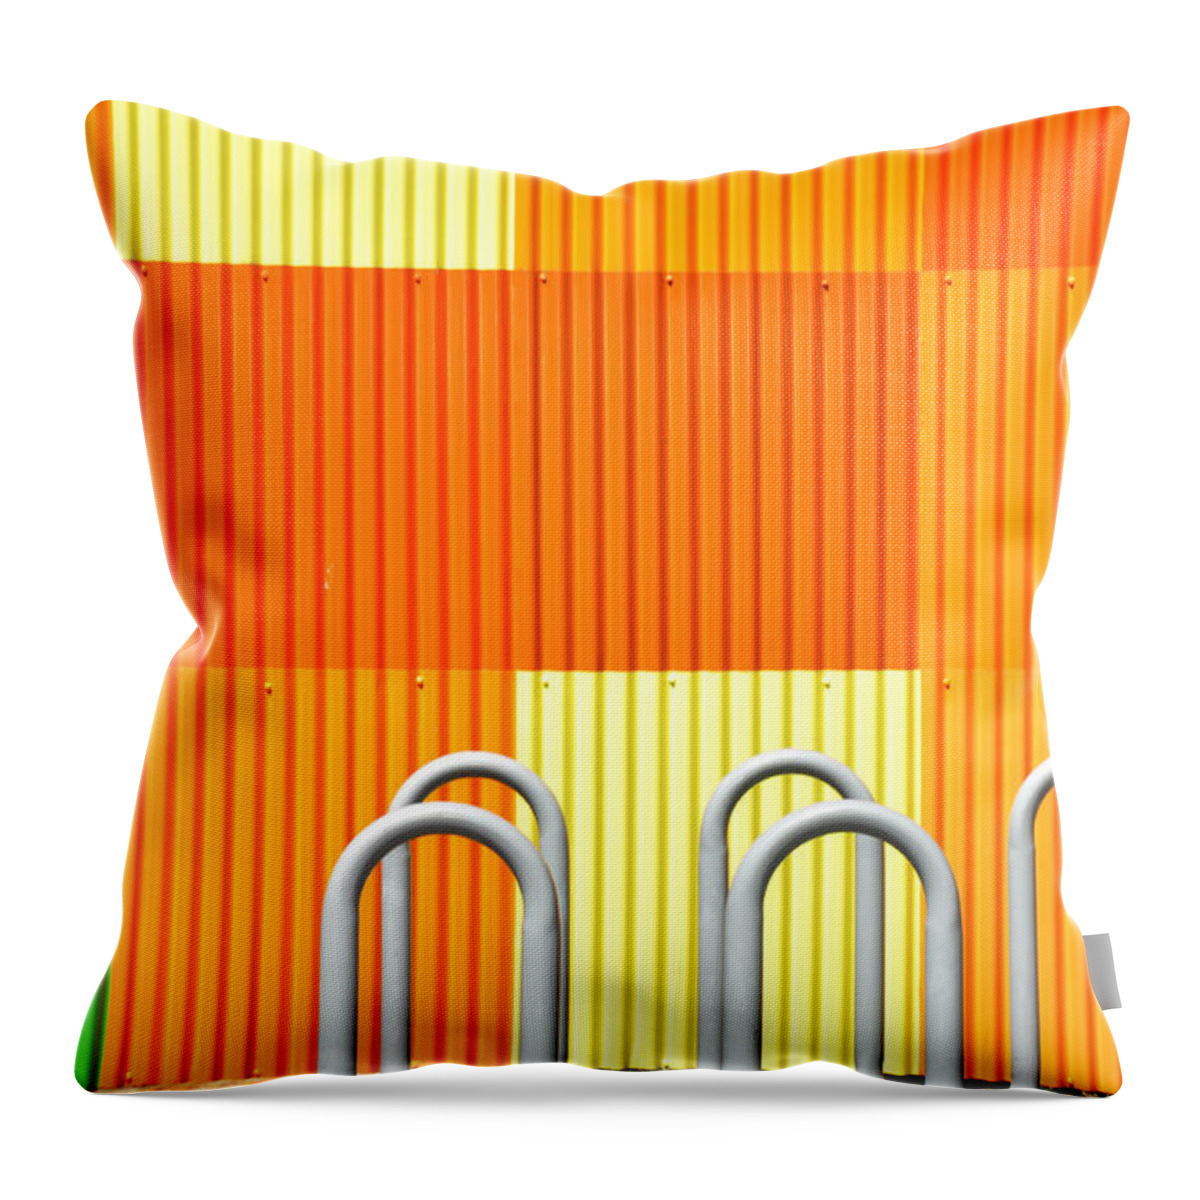 Orange Throw Pillow featuring the photograph Squares by Diane Lent